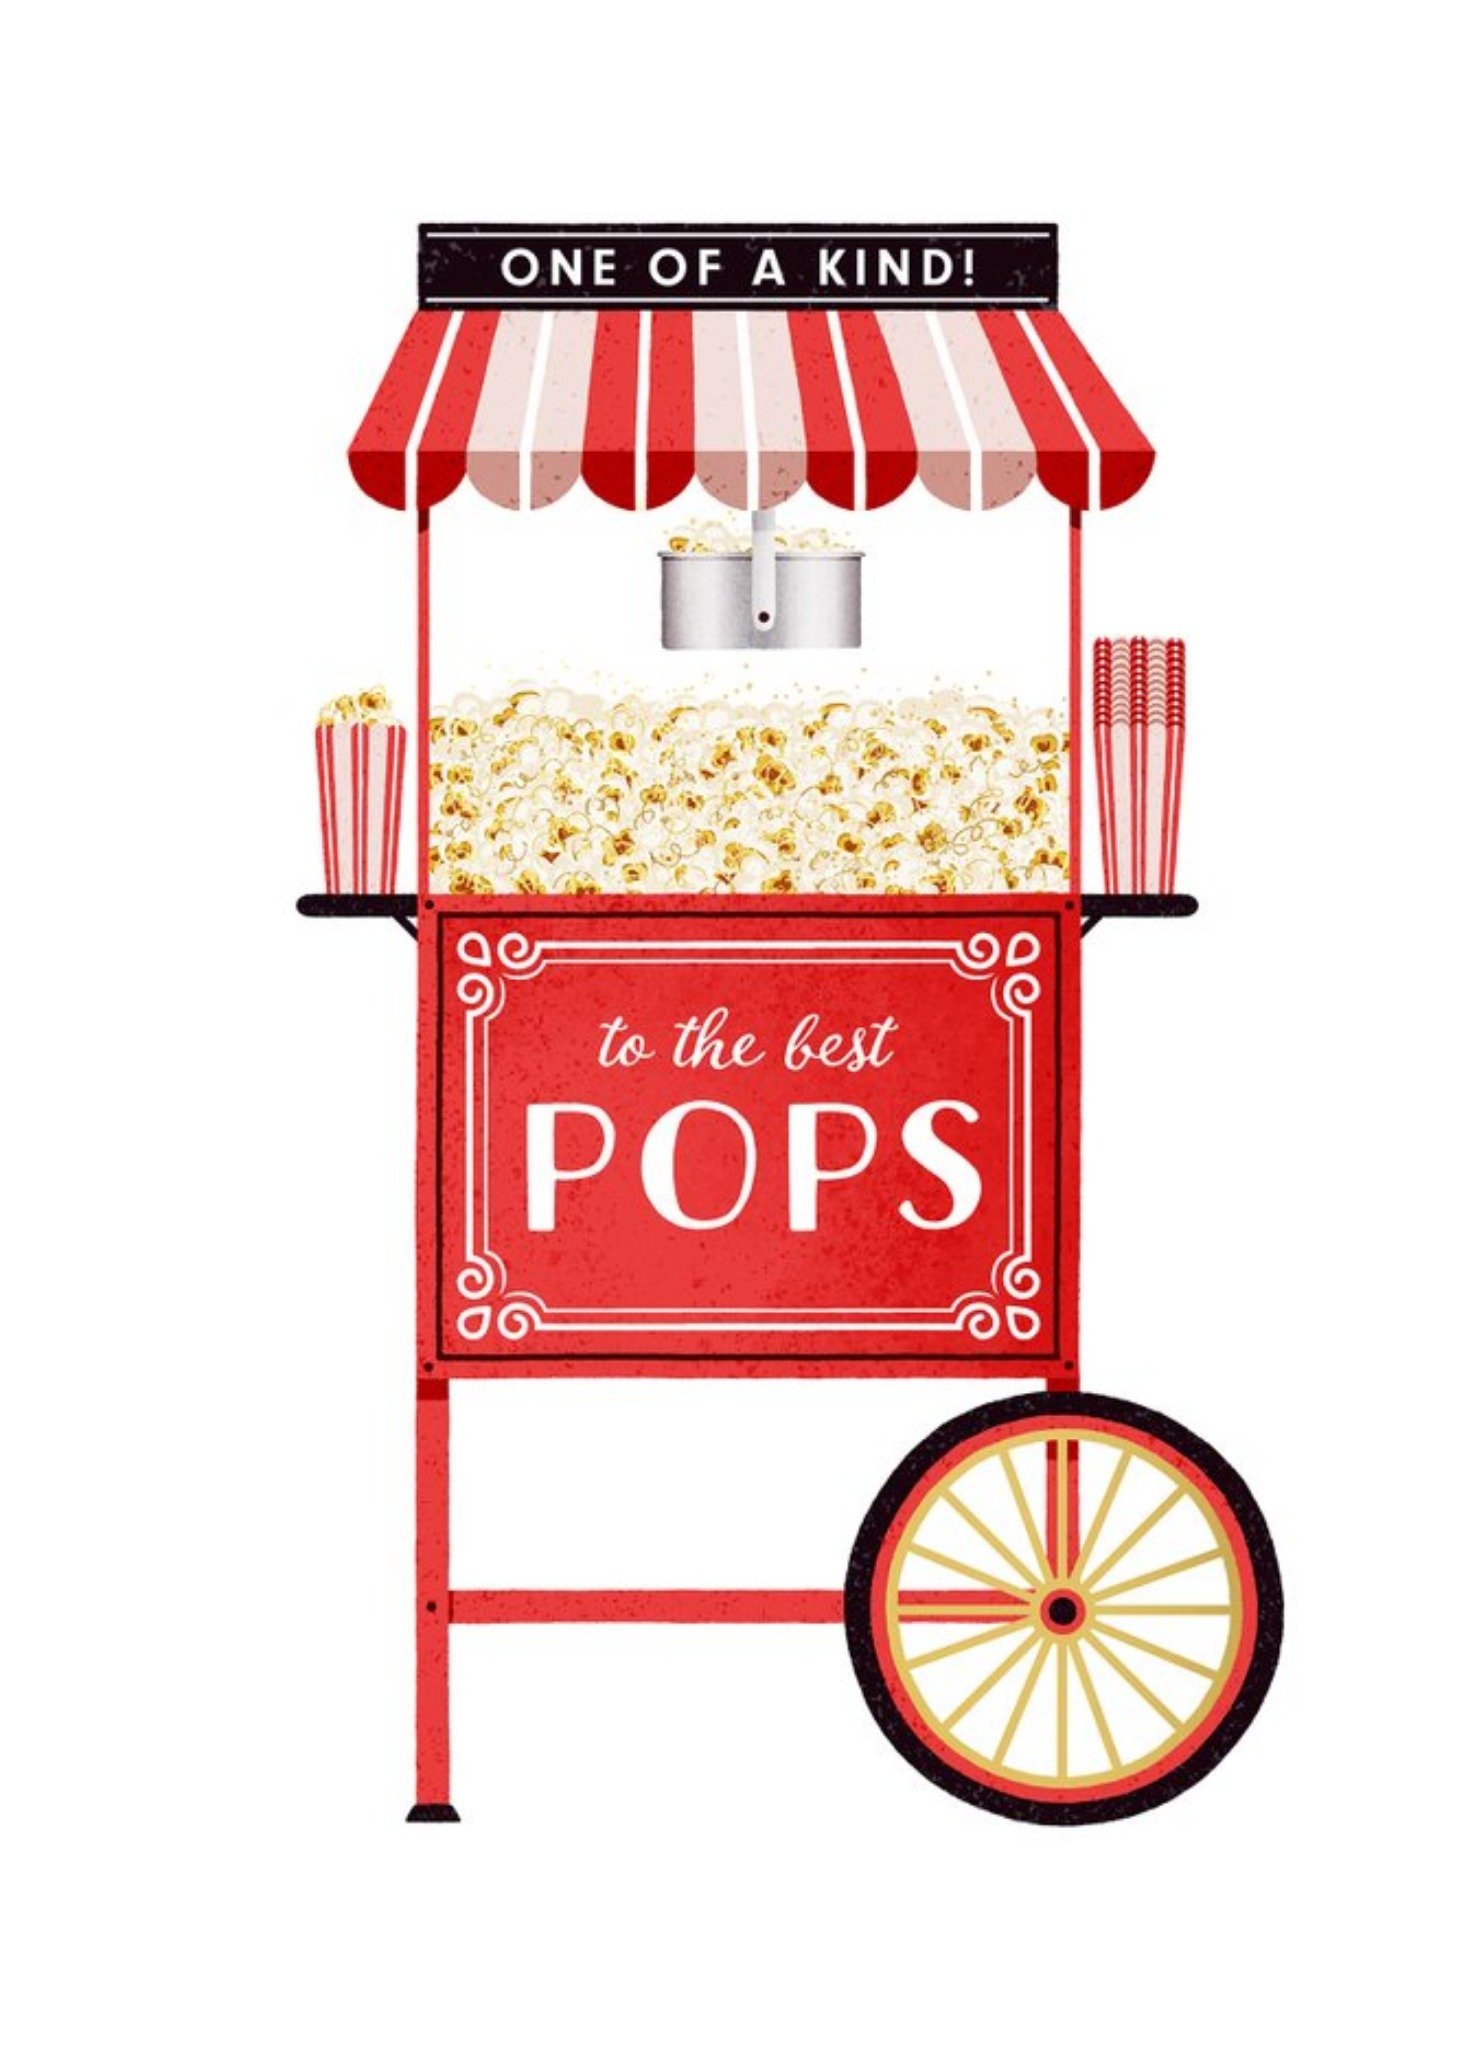 Moonpig Folio Illustration Of Popcorn Cart. One Of A Kind. To The Best Pops Birthday Card Ecard